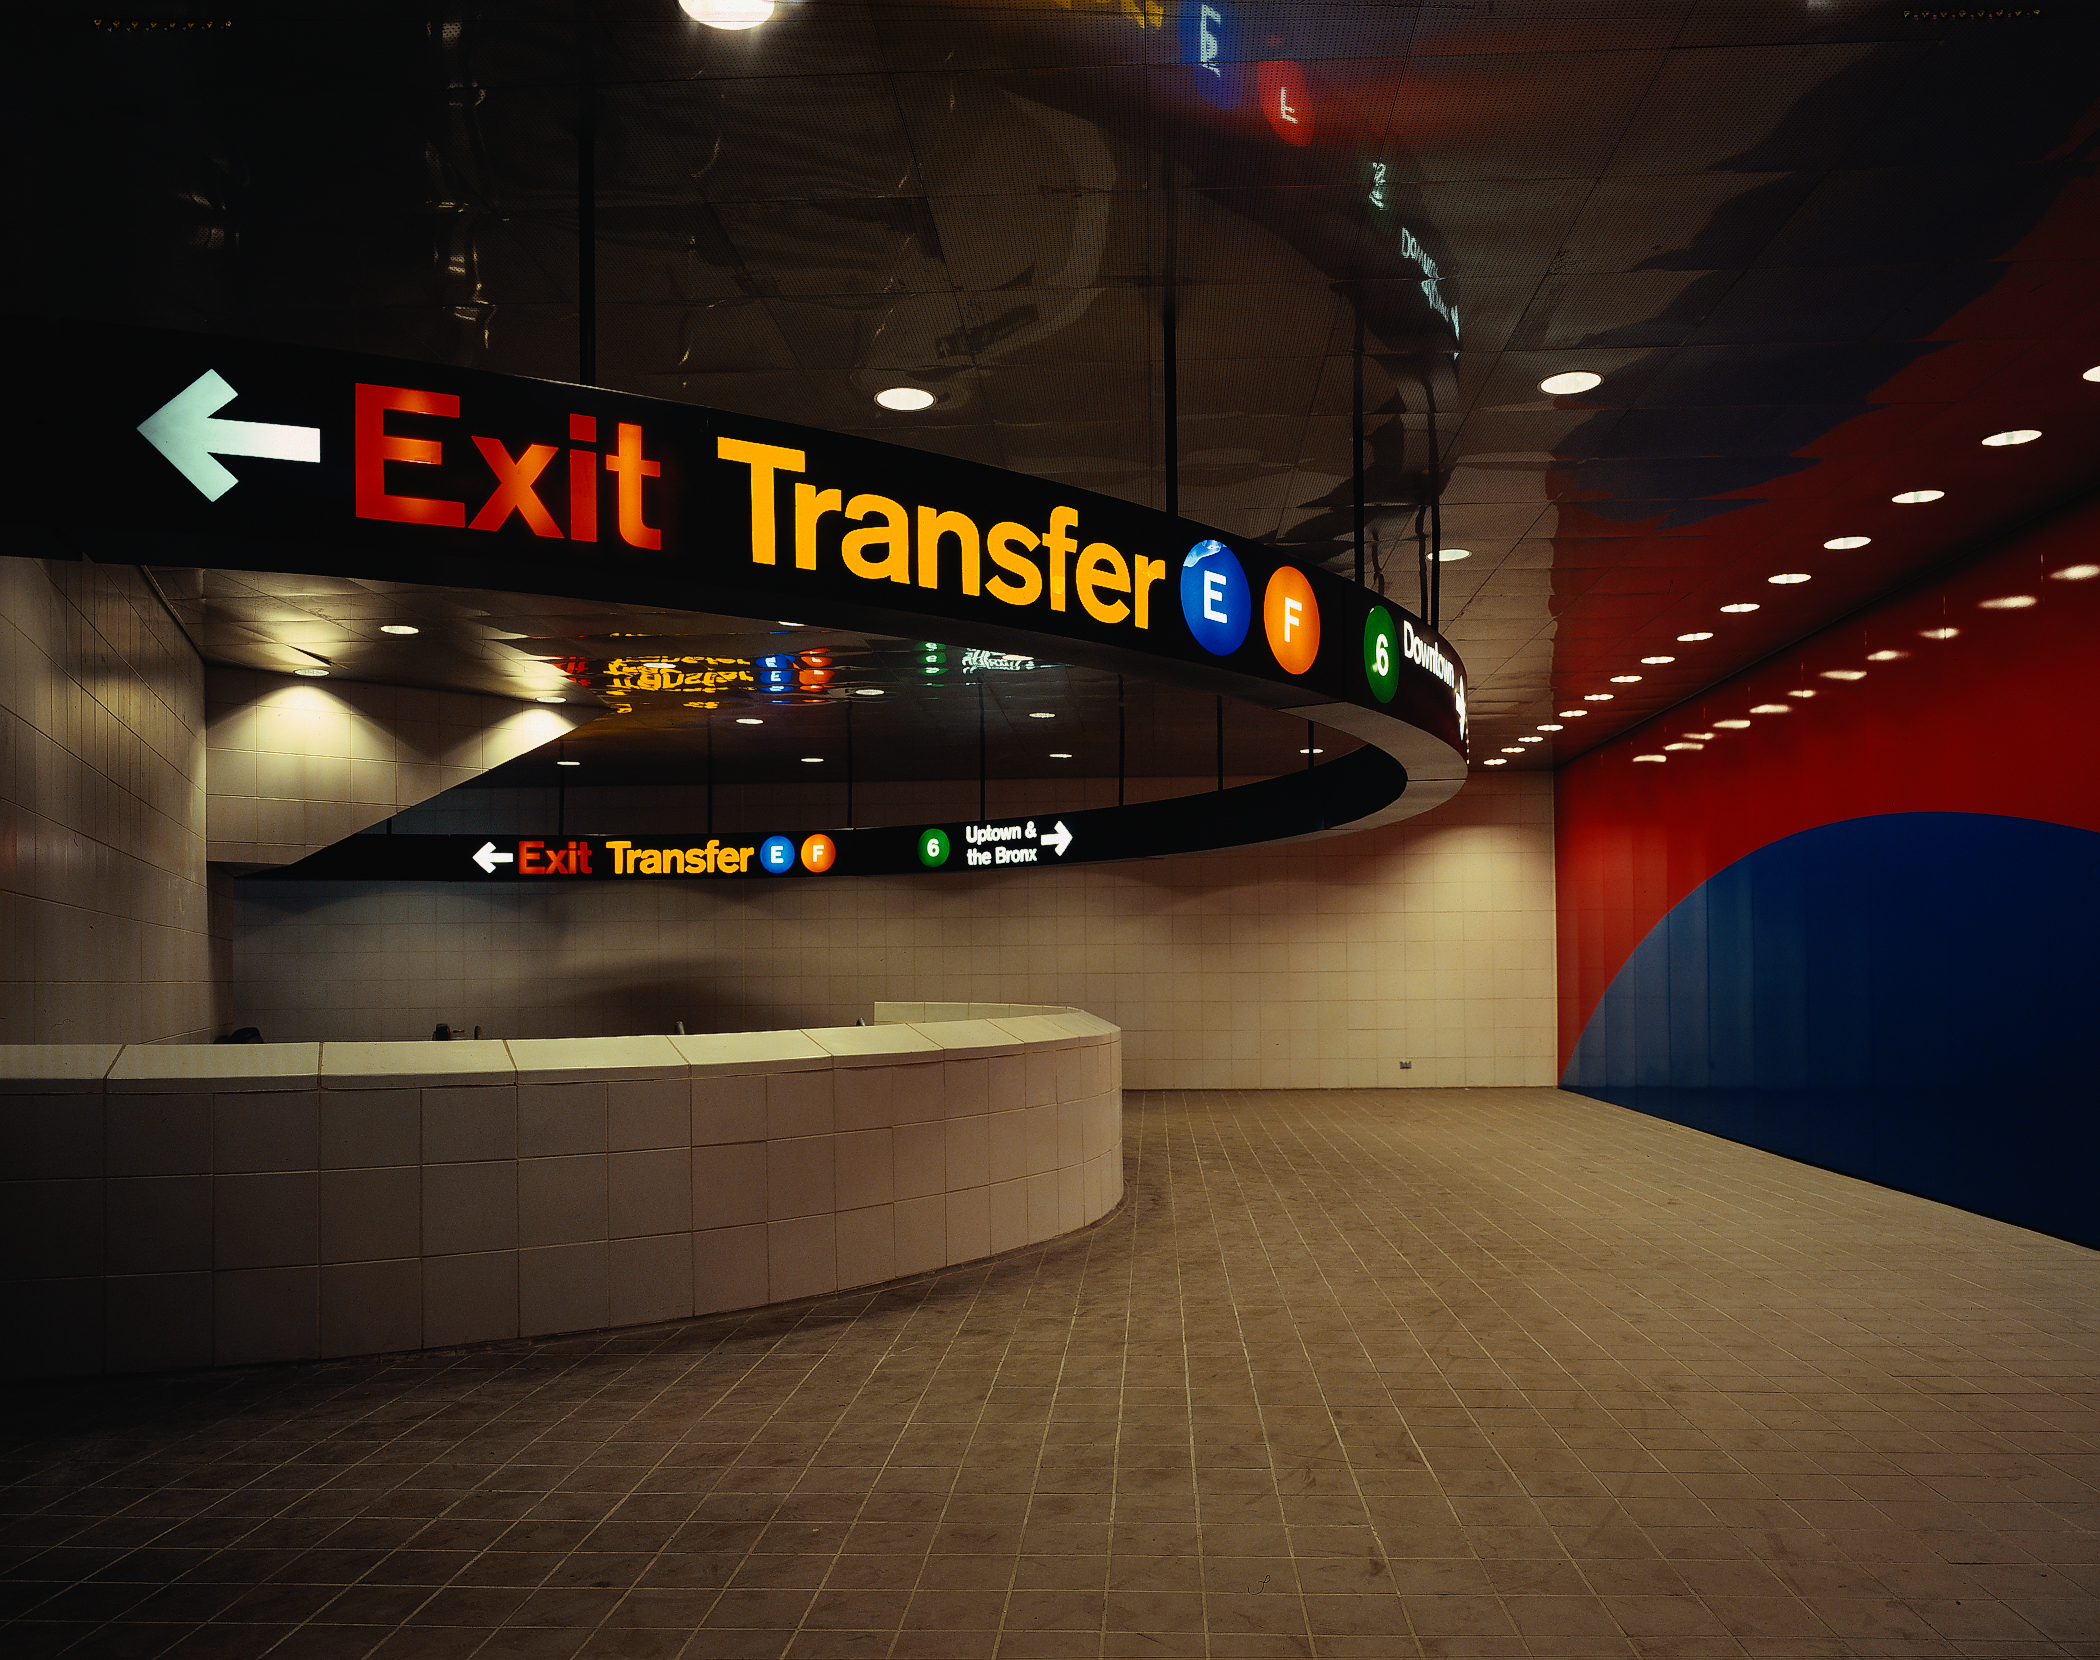 Project image 2 for 53rd & Lex Subway Signage, Metropolitan Transit Authority